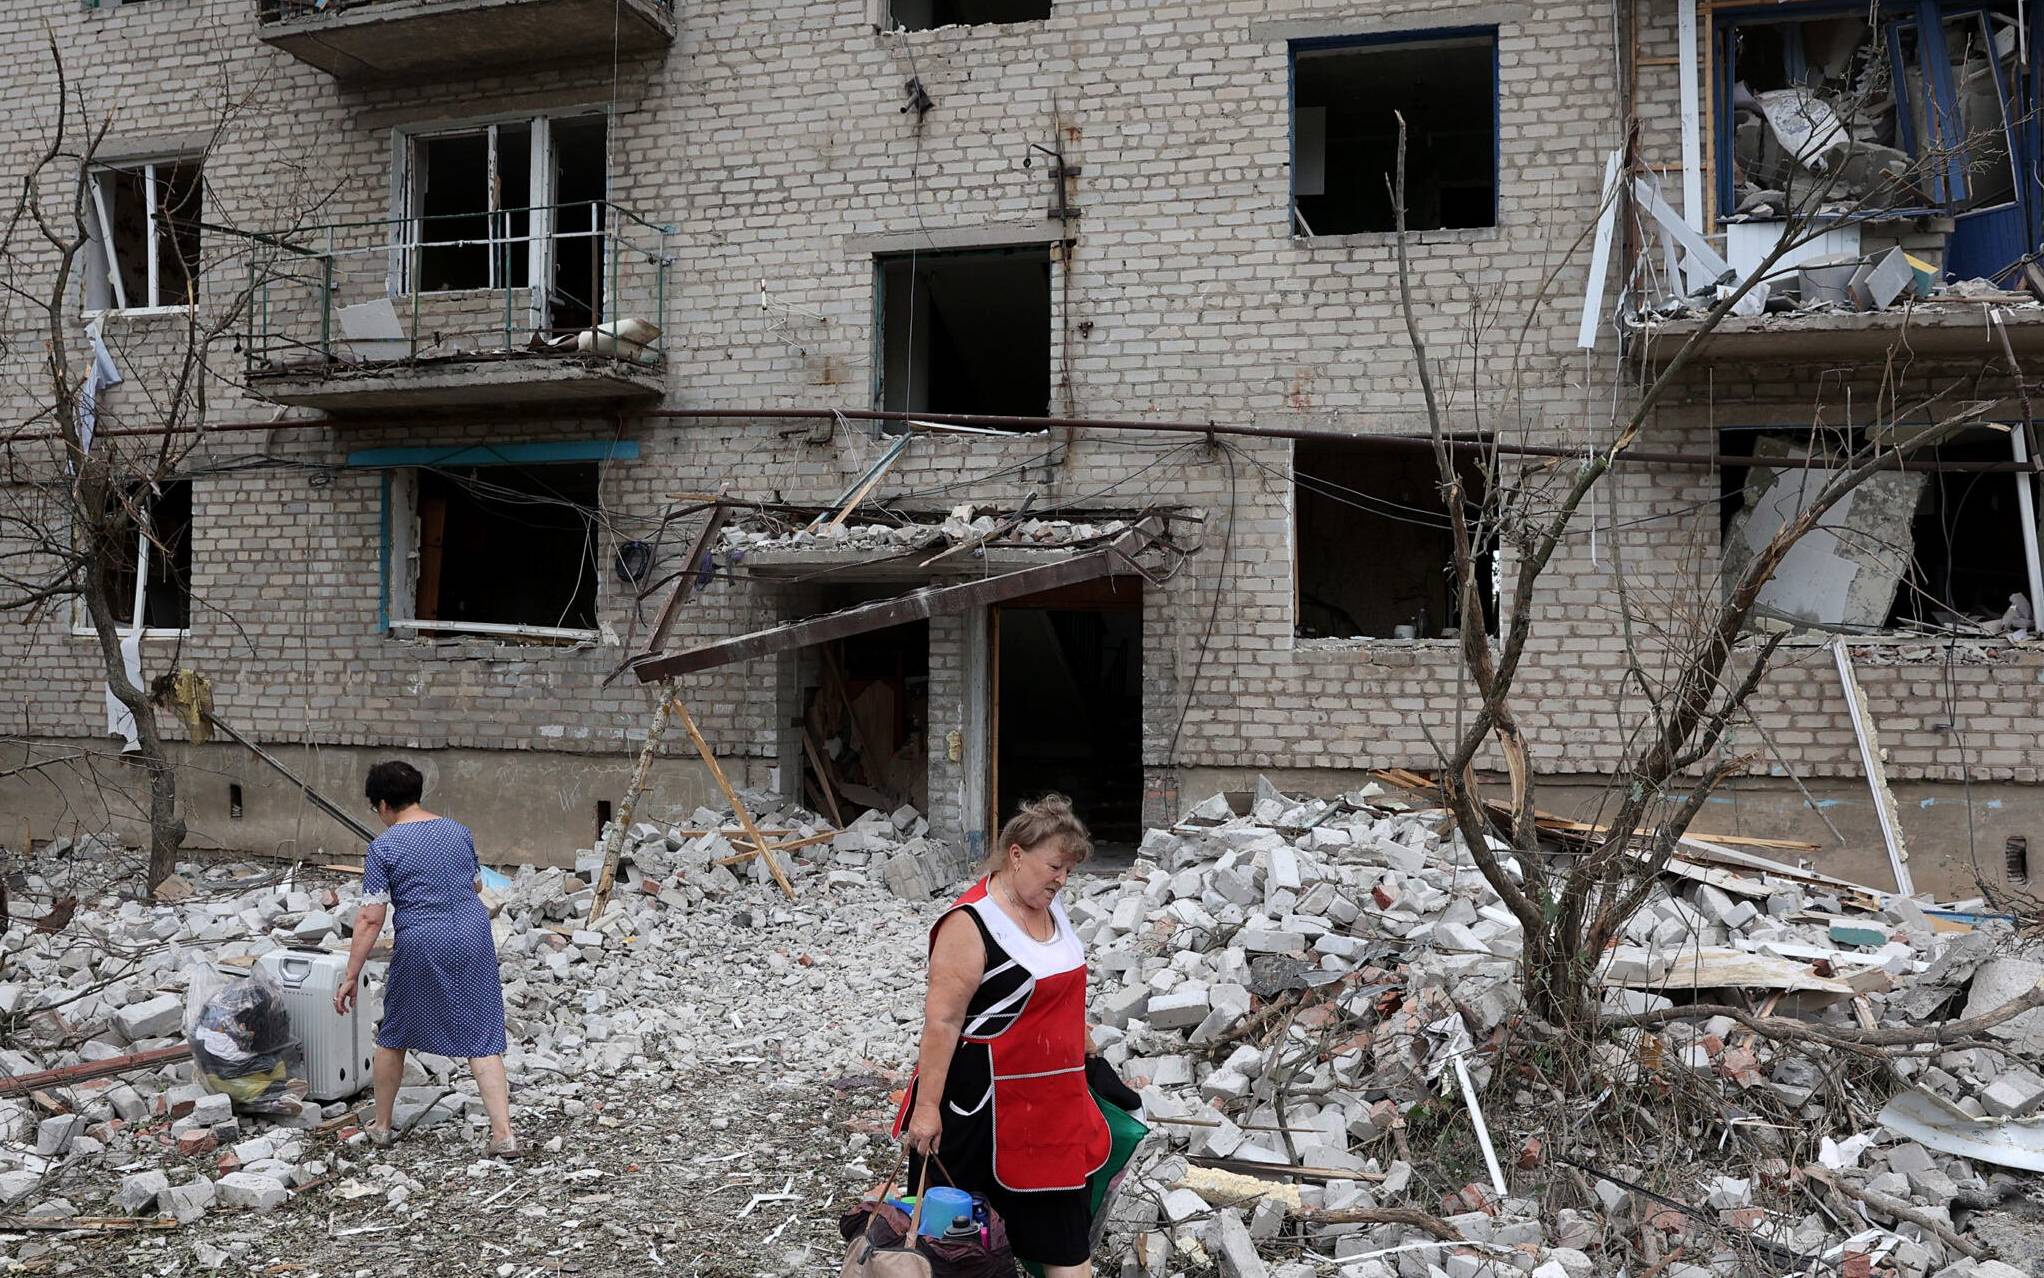 A local resident woman carries her belongings out of a building partially destroyed following shelling in Chasiv Yar, eastern Ukraine, on July 10, 2022. - The four-story building was hit by a Russian Hurricane missile, Pavlo Kyrylenko, governor of the Donetsk region that the Russian army is seeking to conquer, said on July 10, 2022 on Telegram. (Photo by Anatolii Stepanov / AFP)